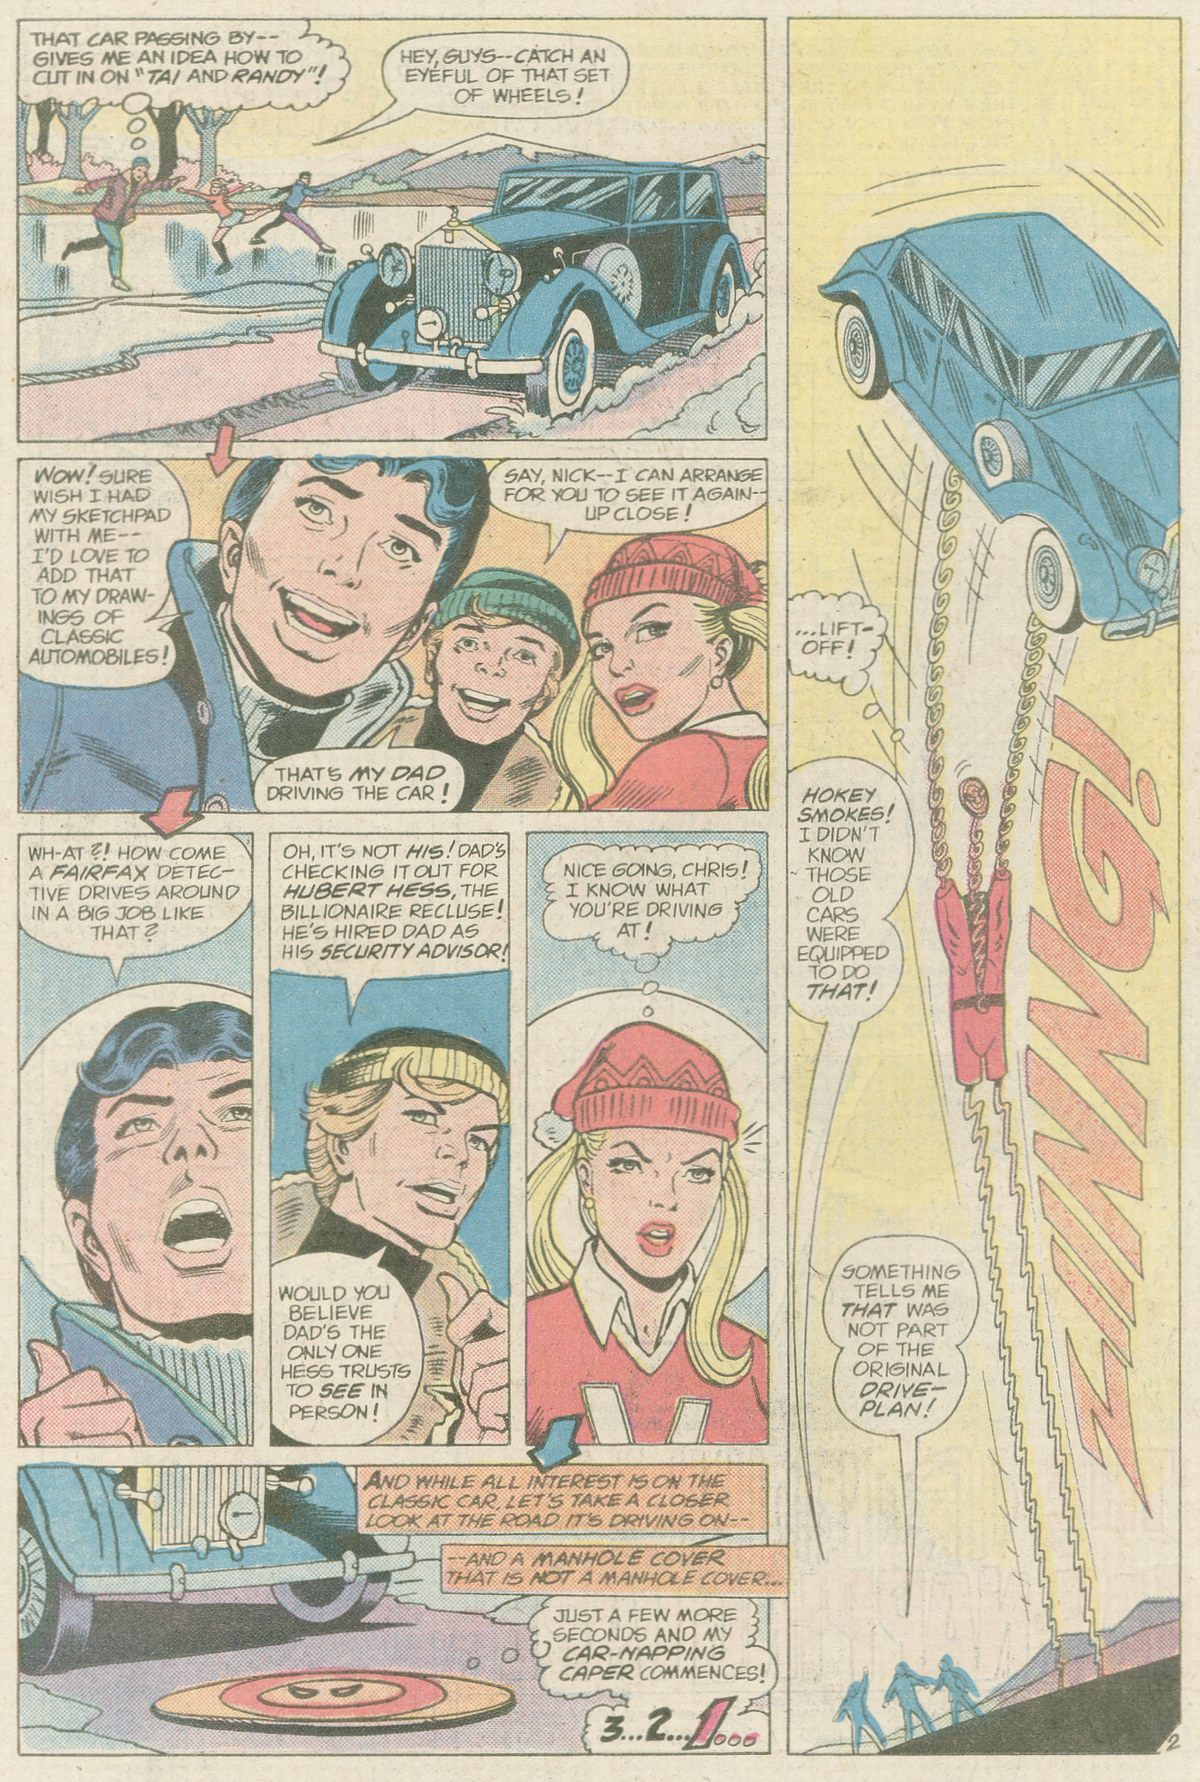 The New Adventures of Superboy 40 Page 19